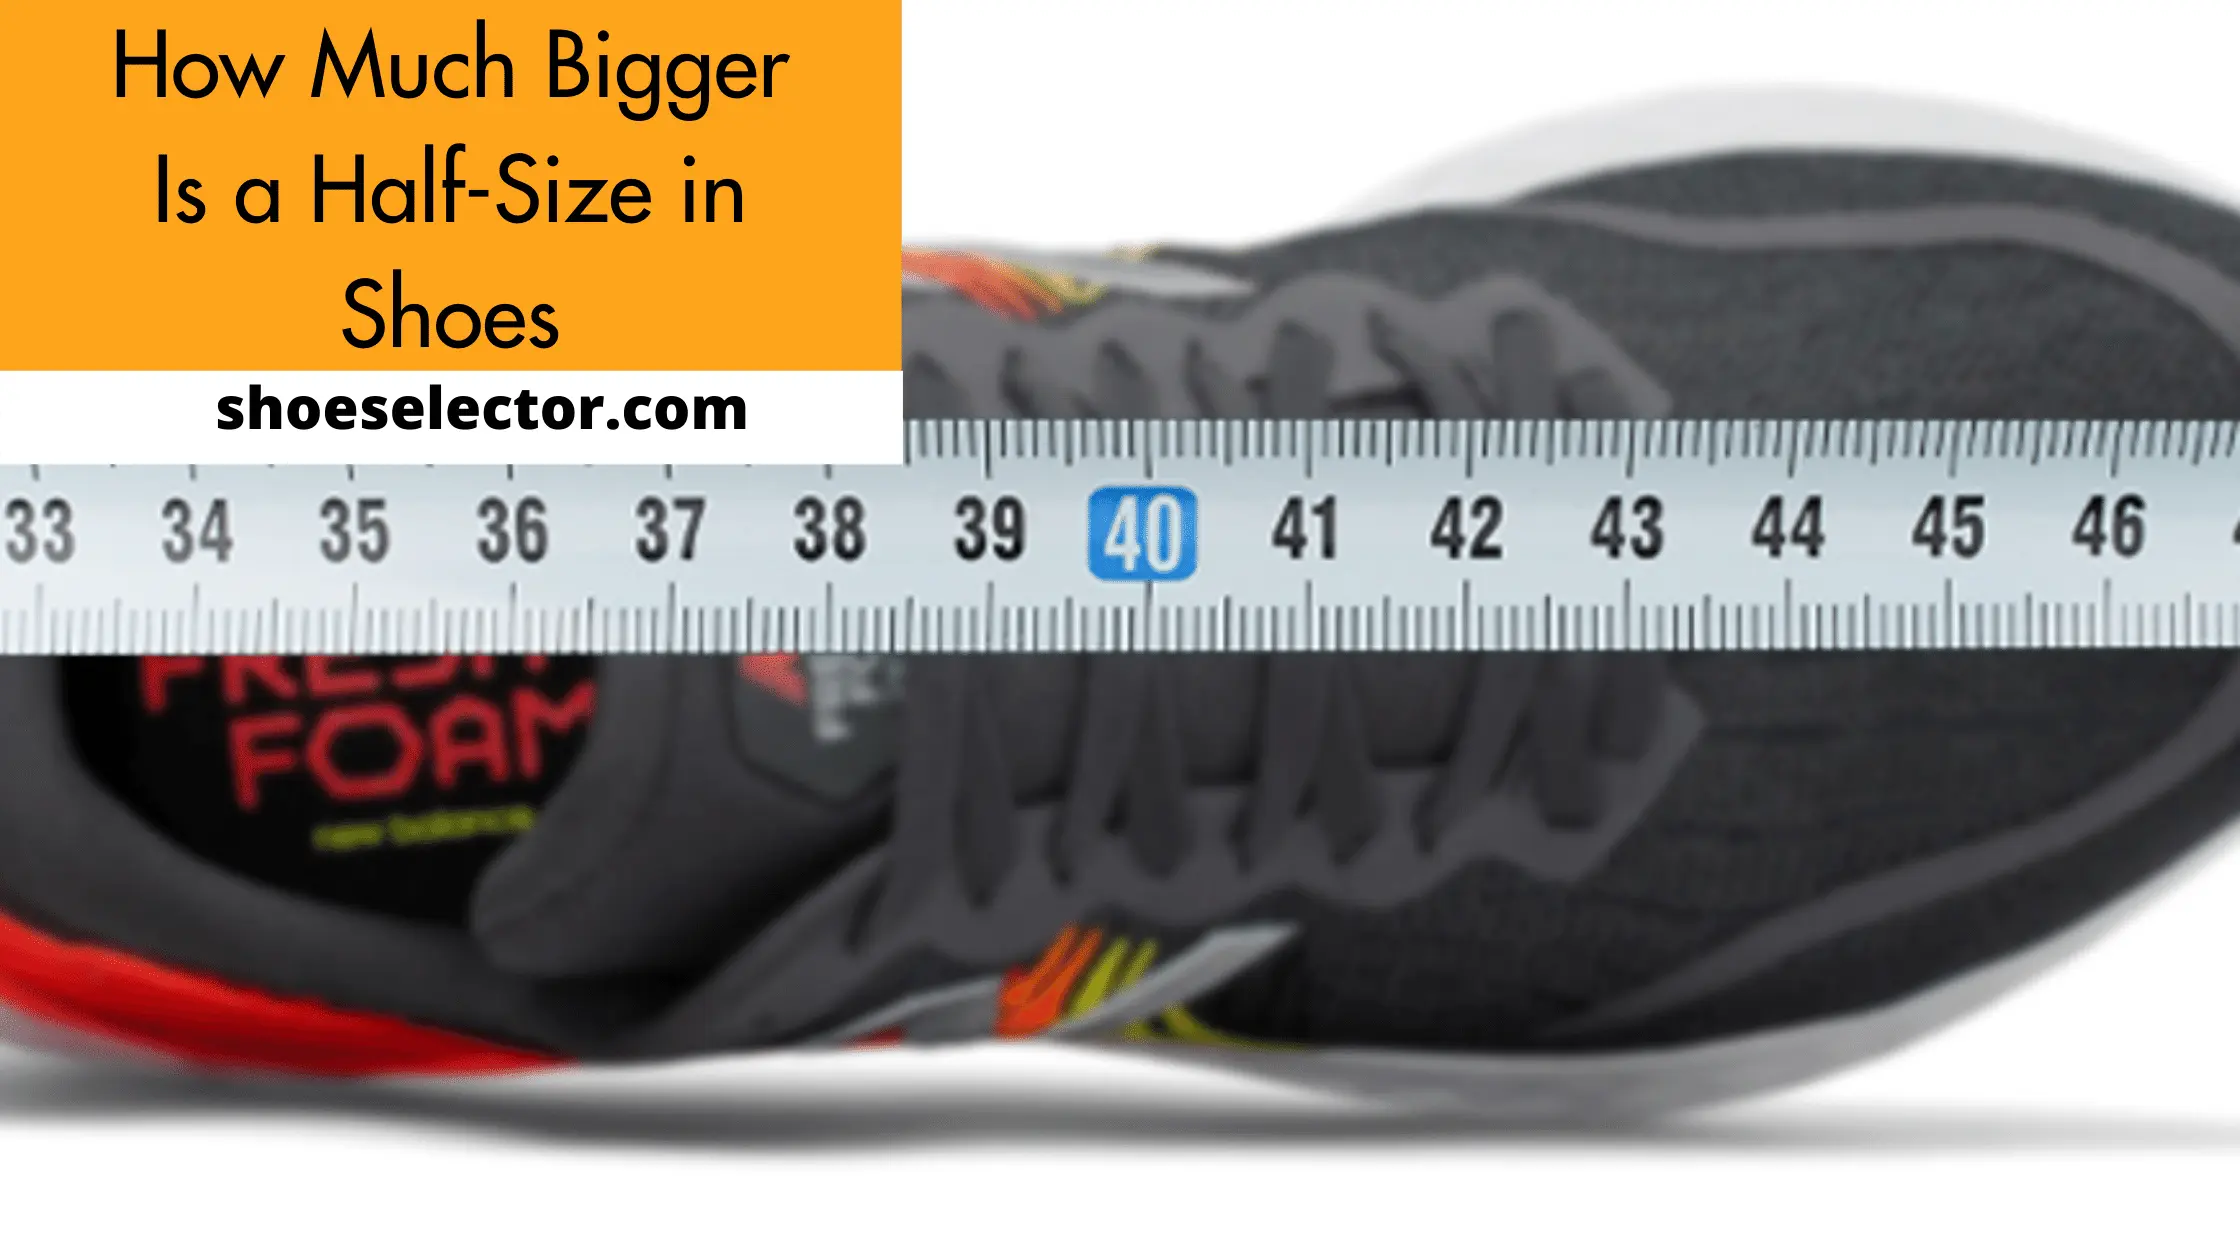 How Much Bigger Is A Half Size In Shoes? - Quick Guide